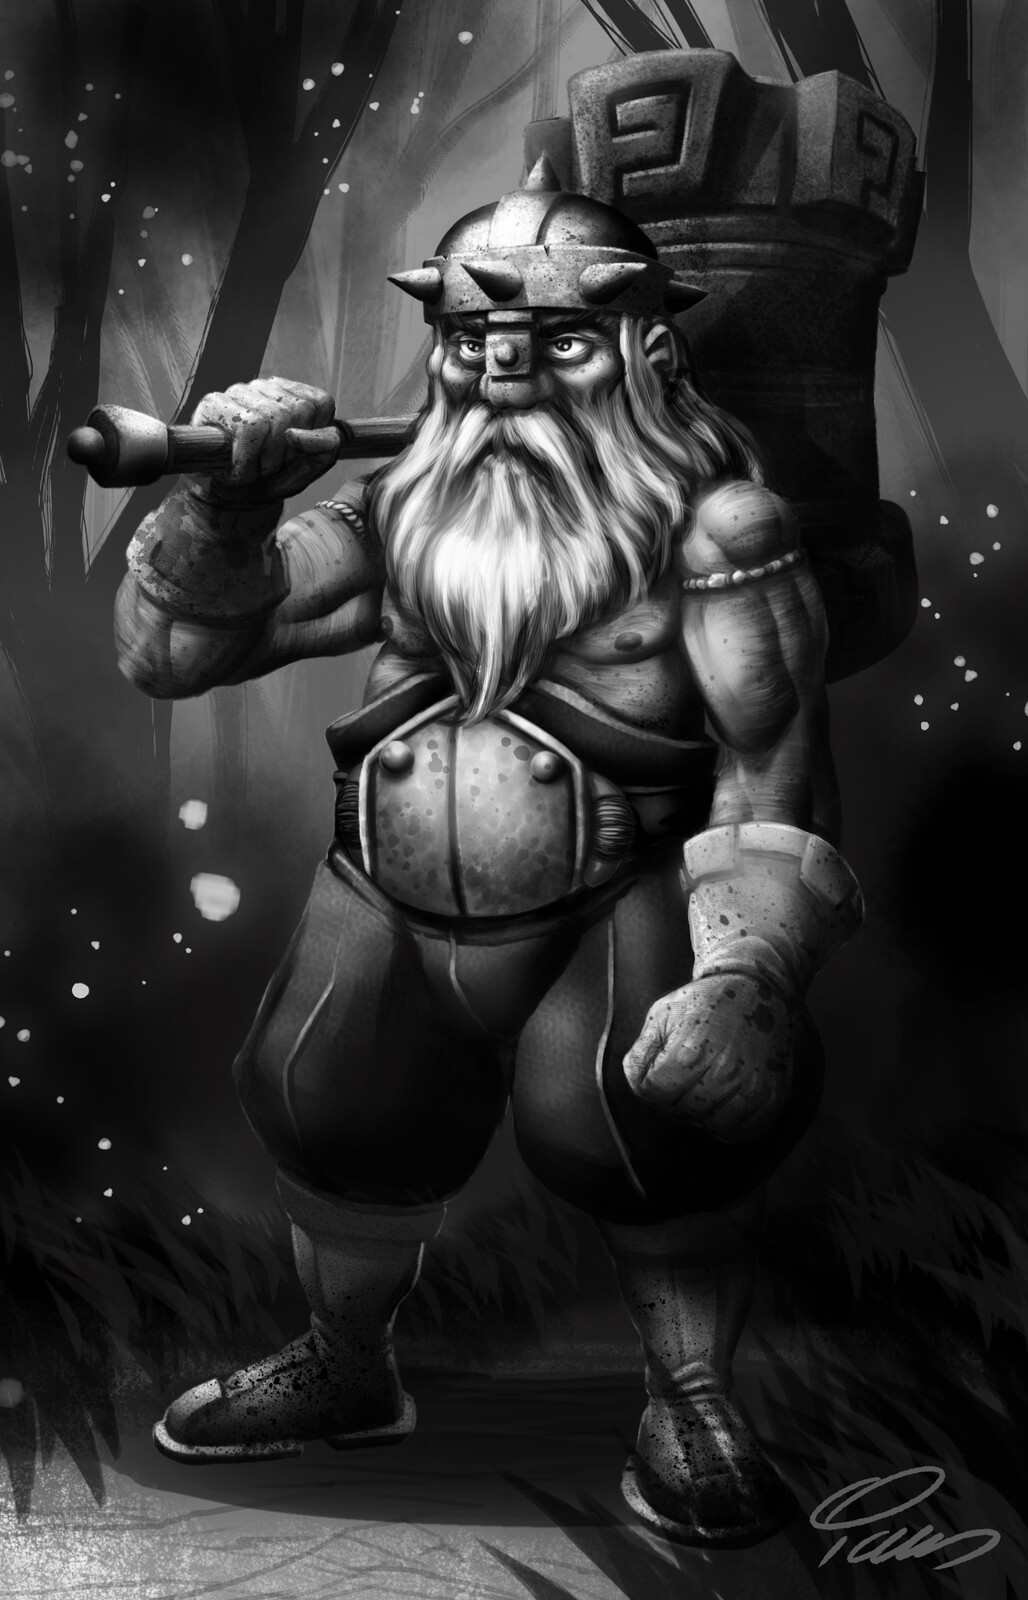 Here is a full figure dwarf from my comic The Axe of Hellena. I am putting these together as a potential RPG or Art Book in the future. 